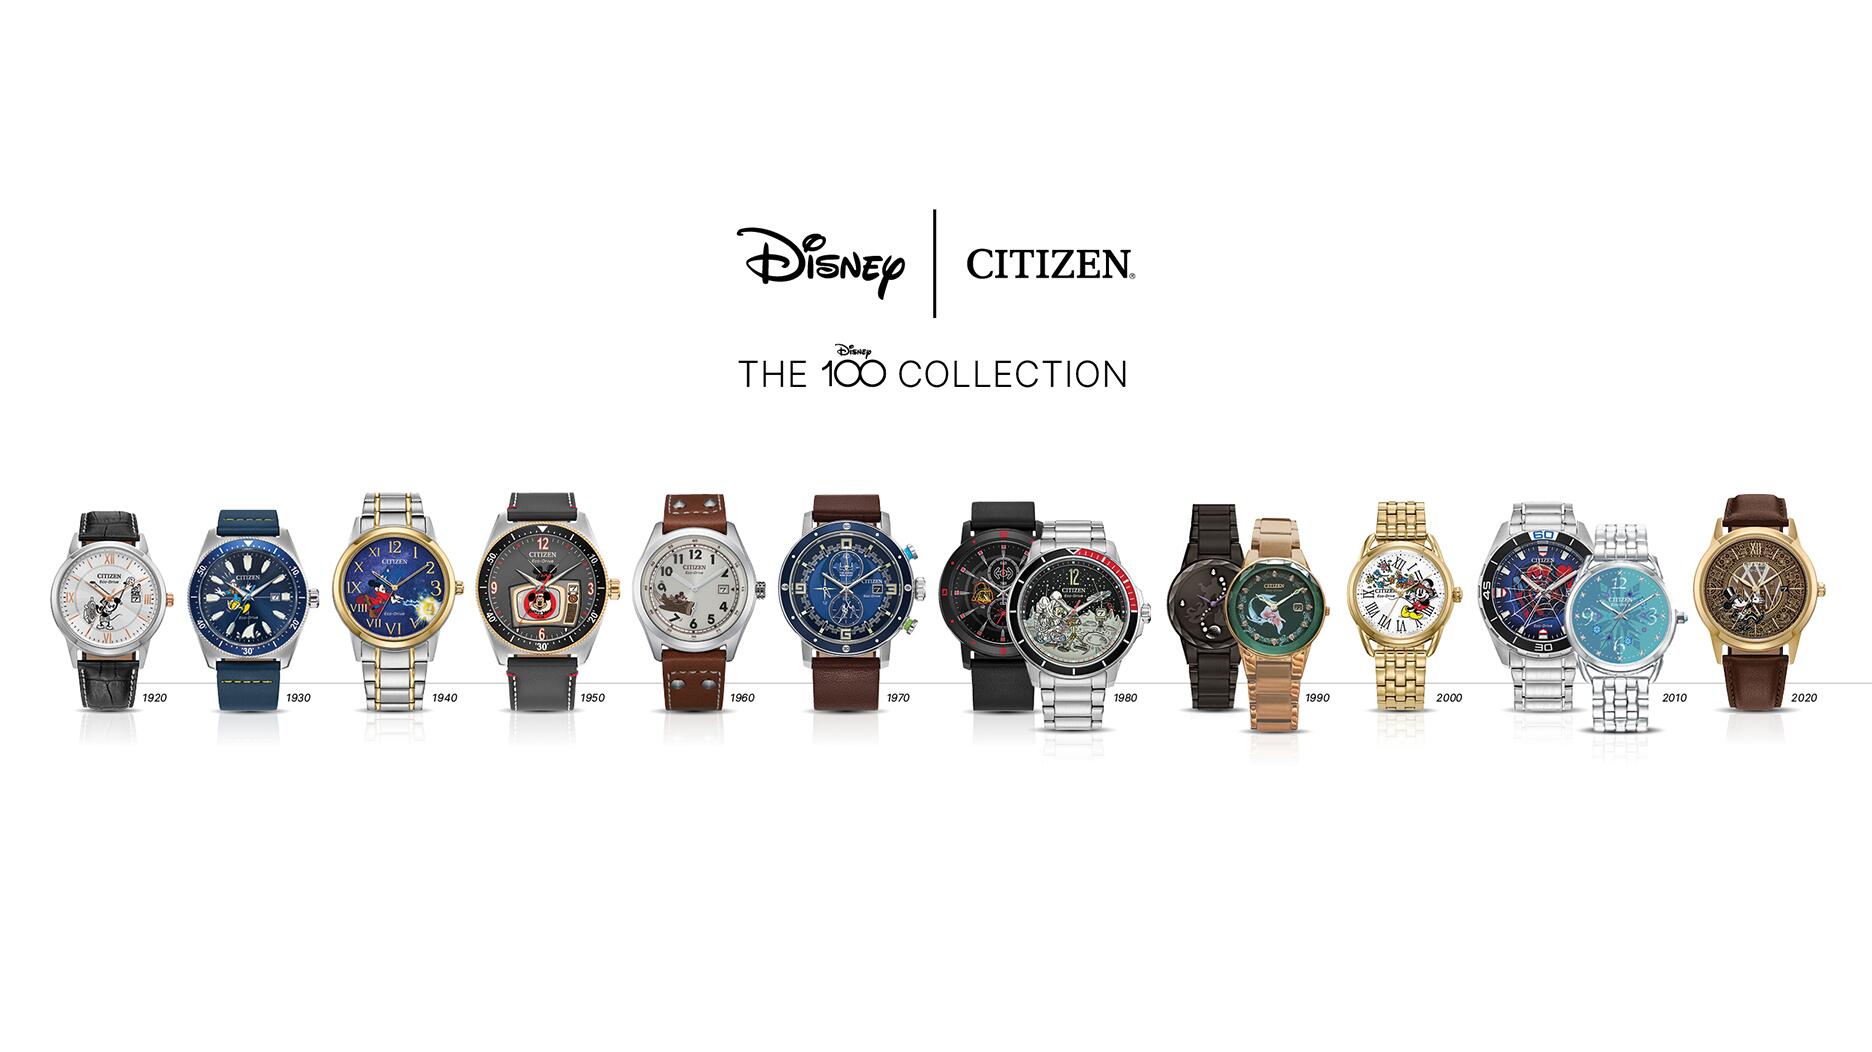 Citizen Celebrates Disney’s 100th Anniversary With New Collection